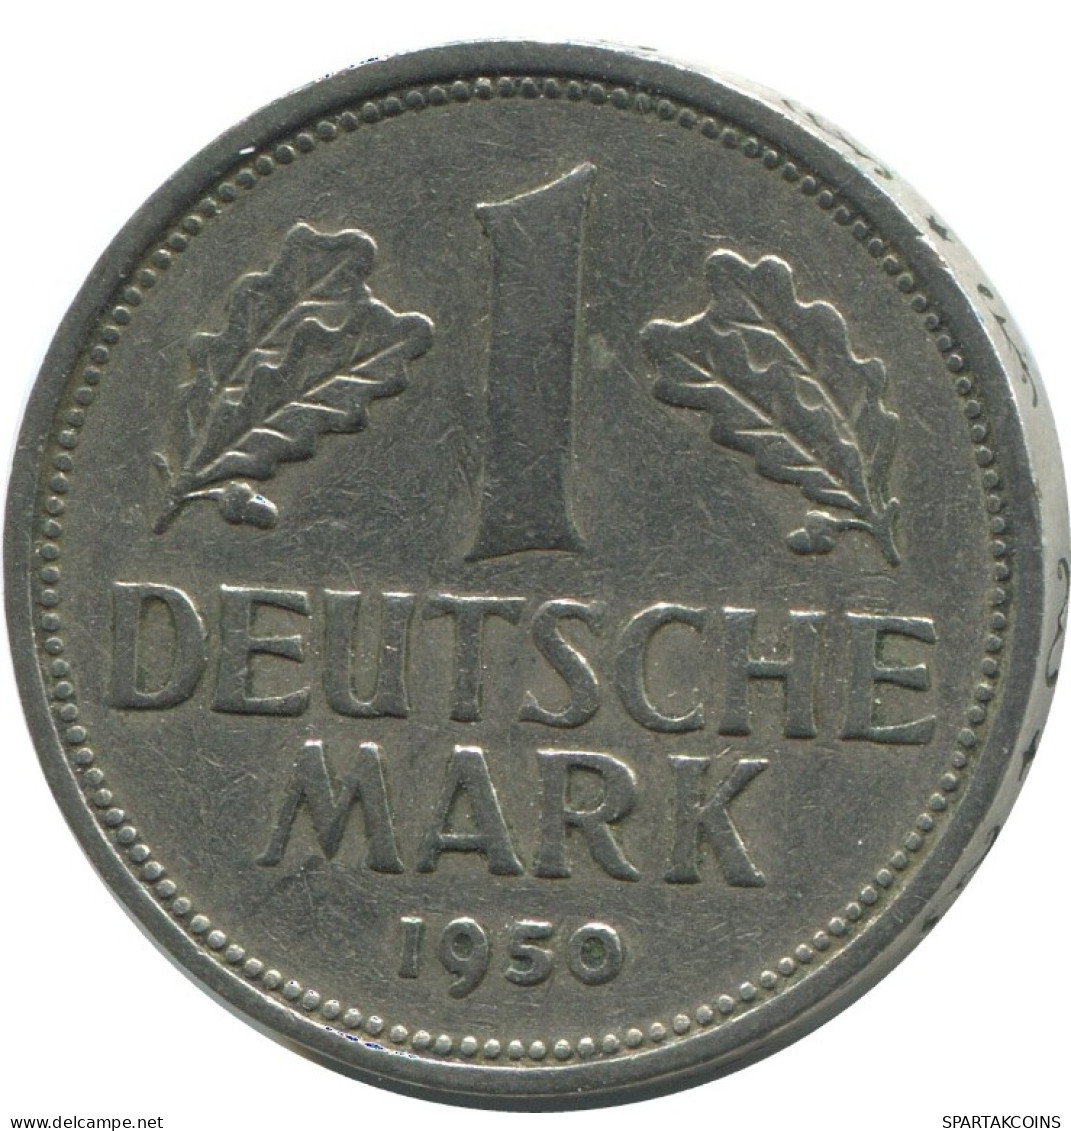 1 DM 1950 J WEST & UNIFIED GERMANY Coin #AG313.3.U.A - 1 Marco